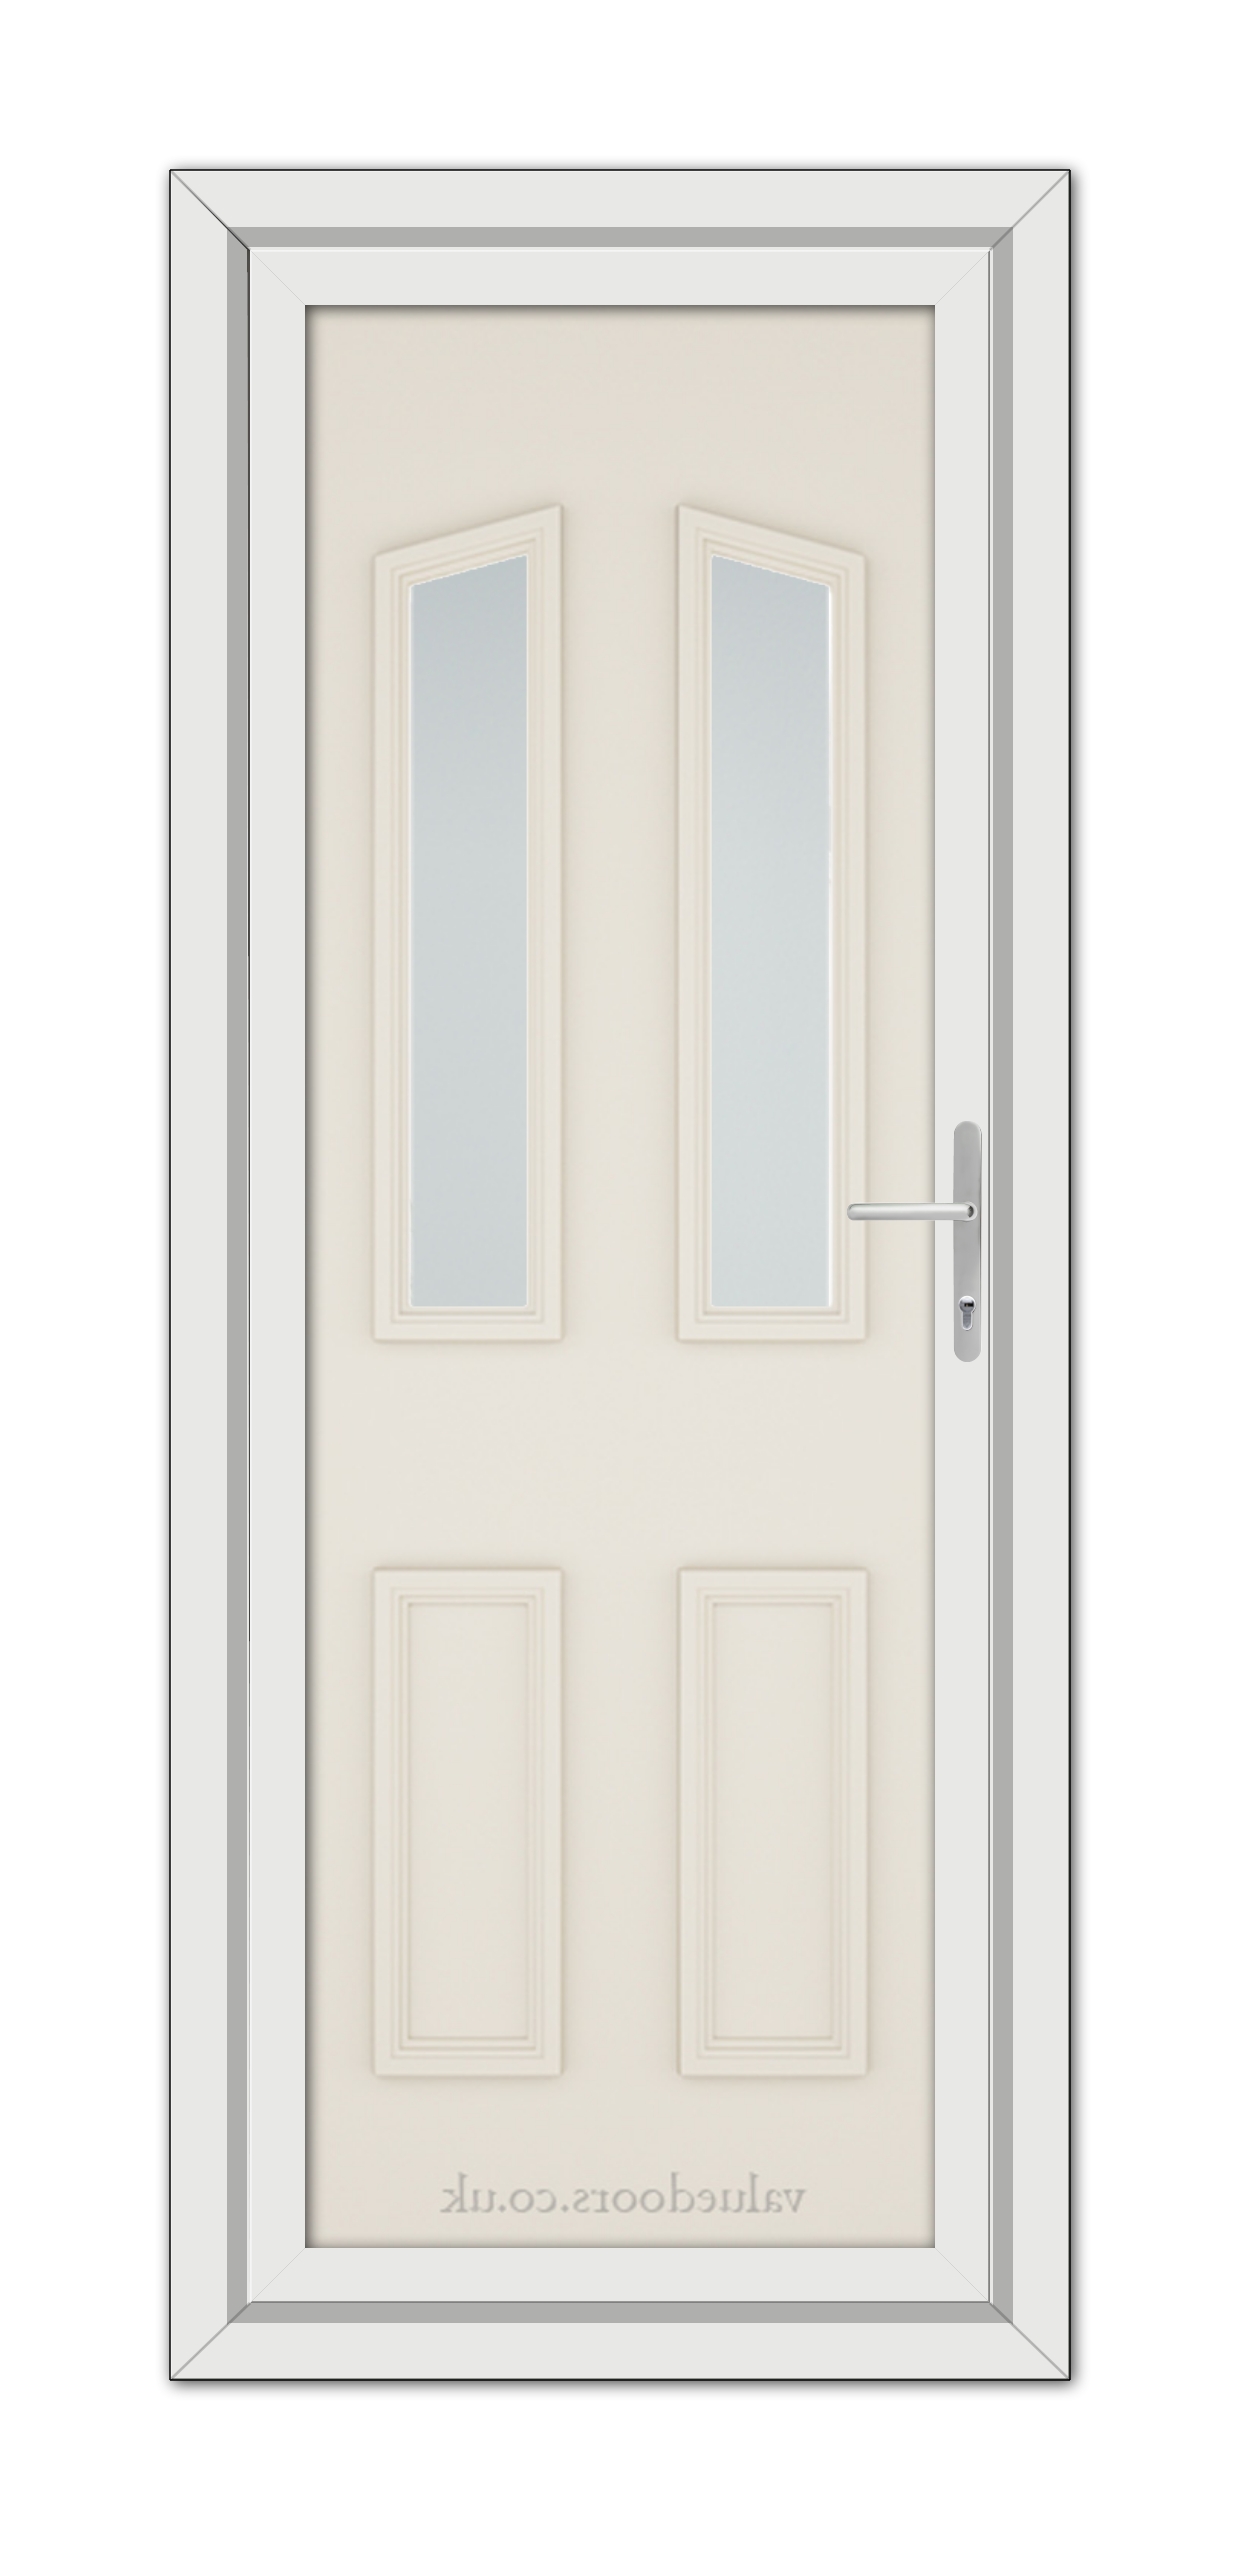 A modern, Cream Kensington uPVC door featuring two vertical glass panels and a metal handle, set within a simple frame.